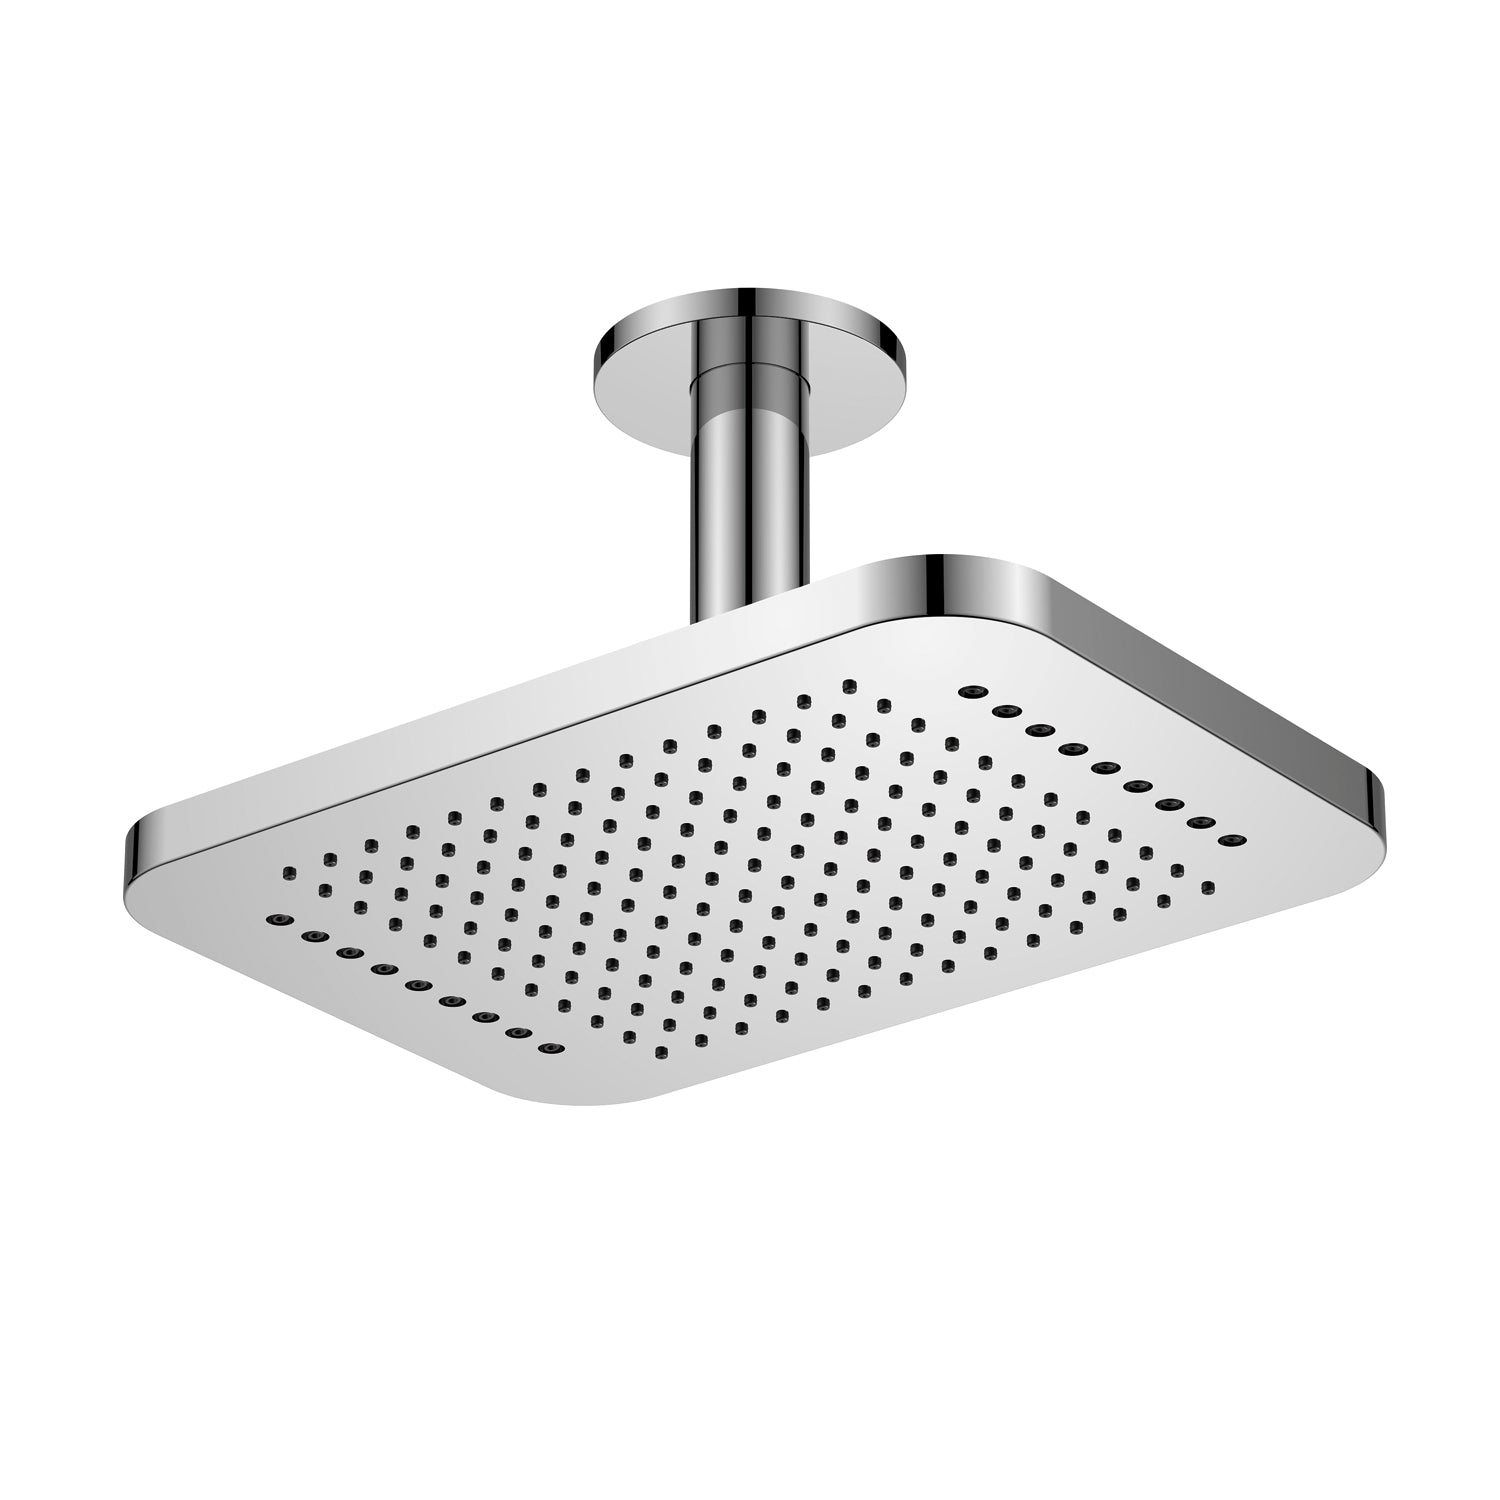 DAX Ceiling Mounted Square Rain Shower Head with Shower Arm, Chrome Finish, 12-1/4 x 8-9/16 Inches (DAX-B16-CR)